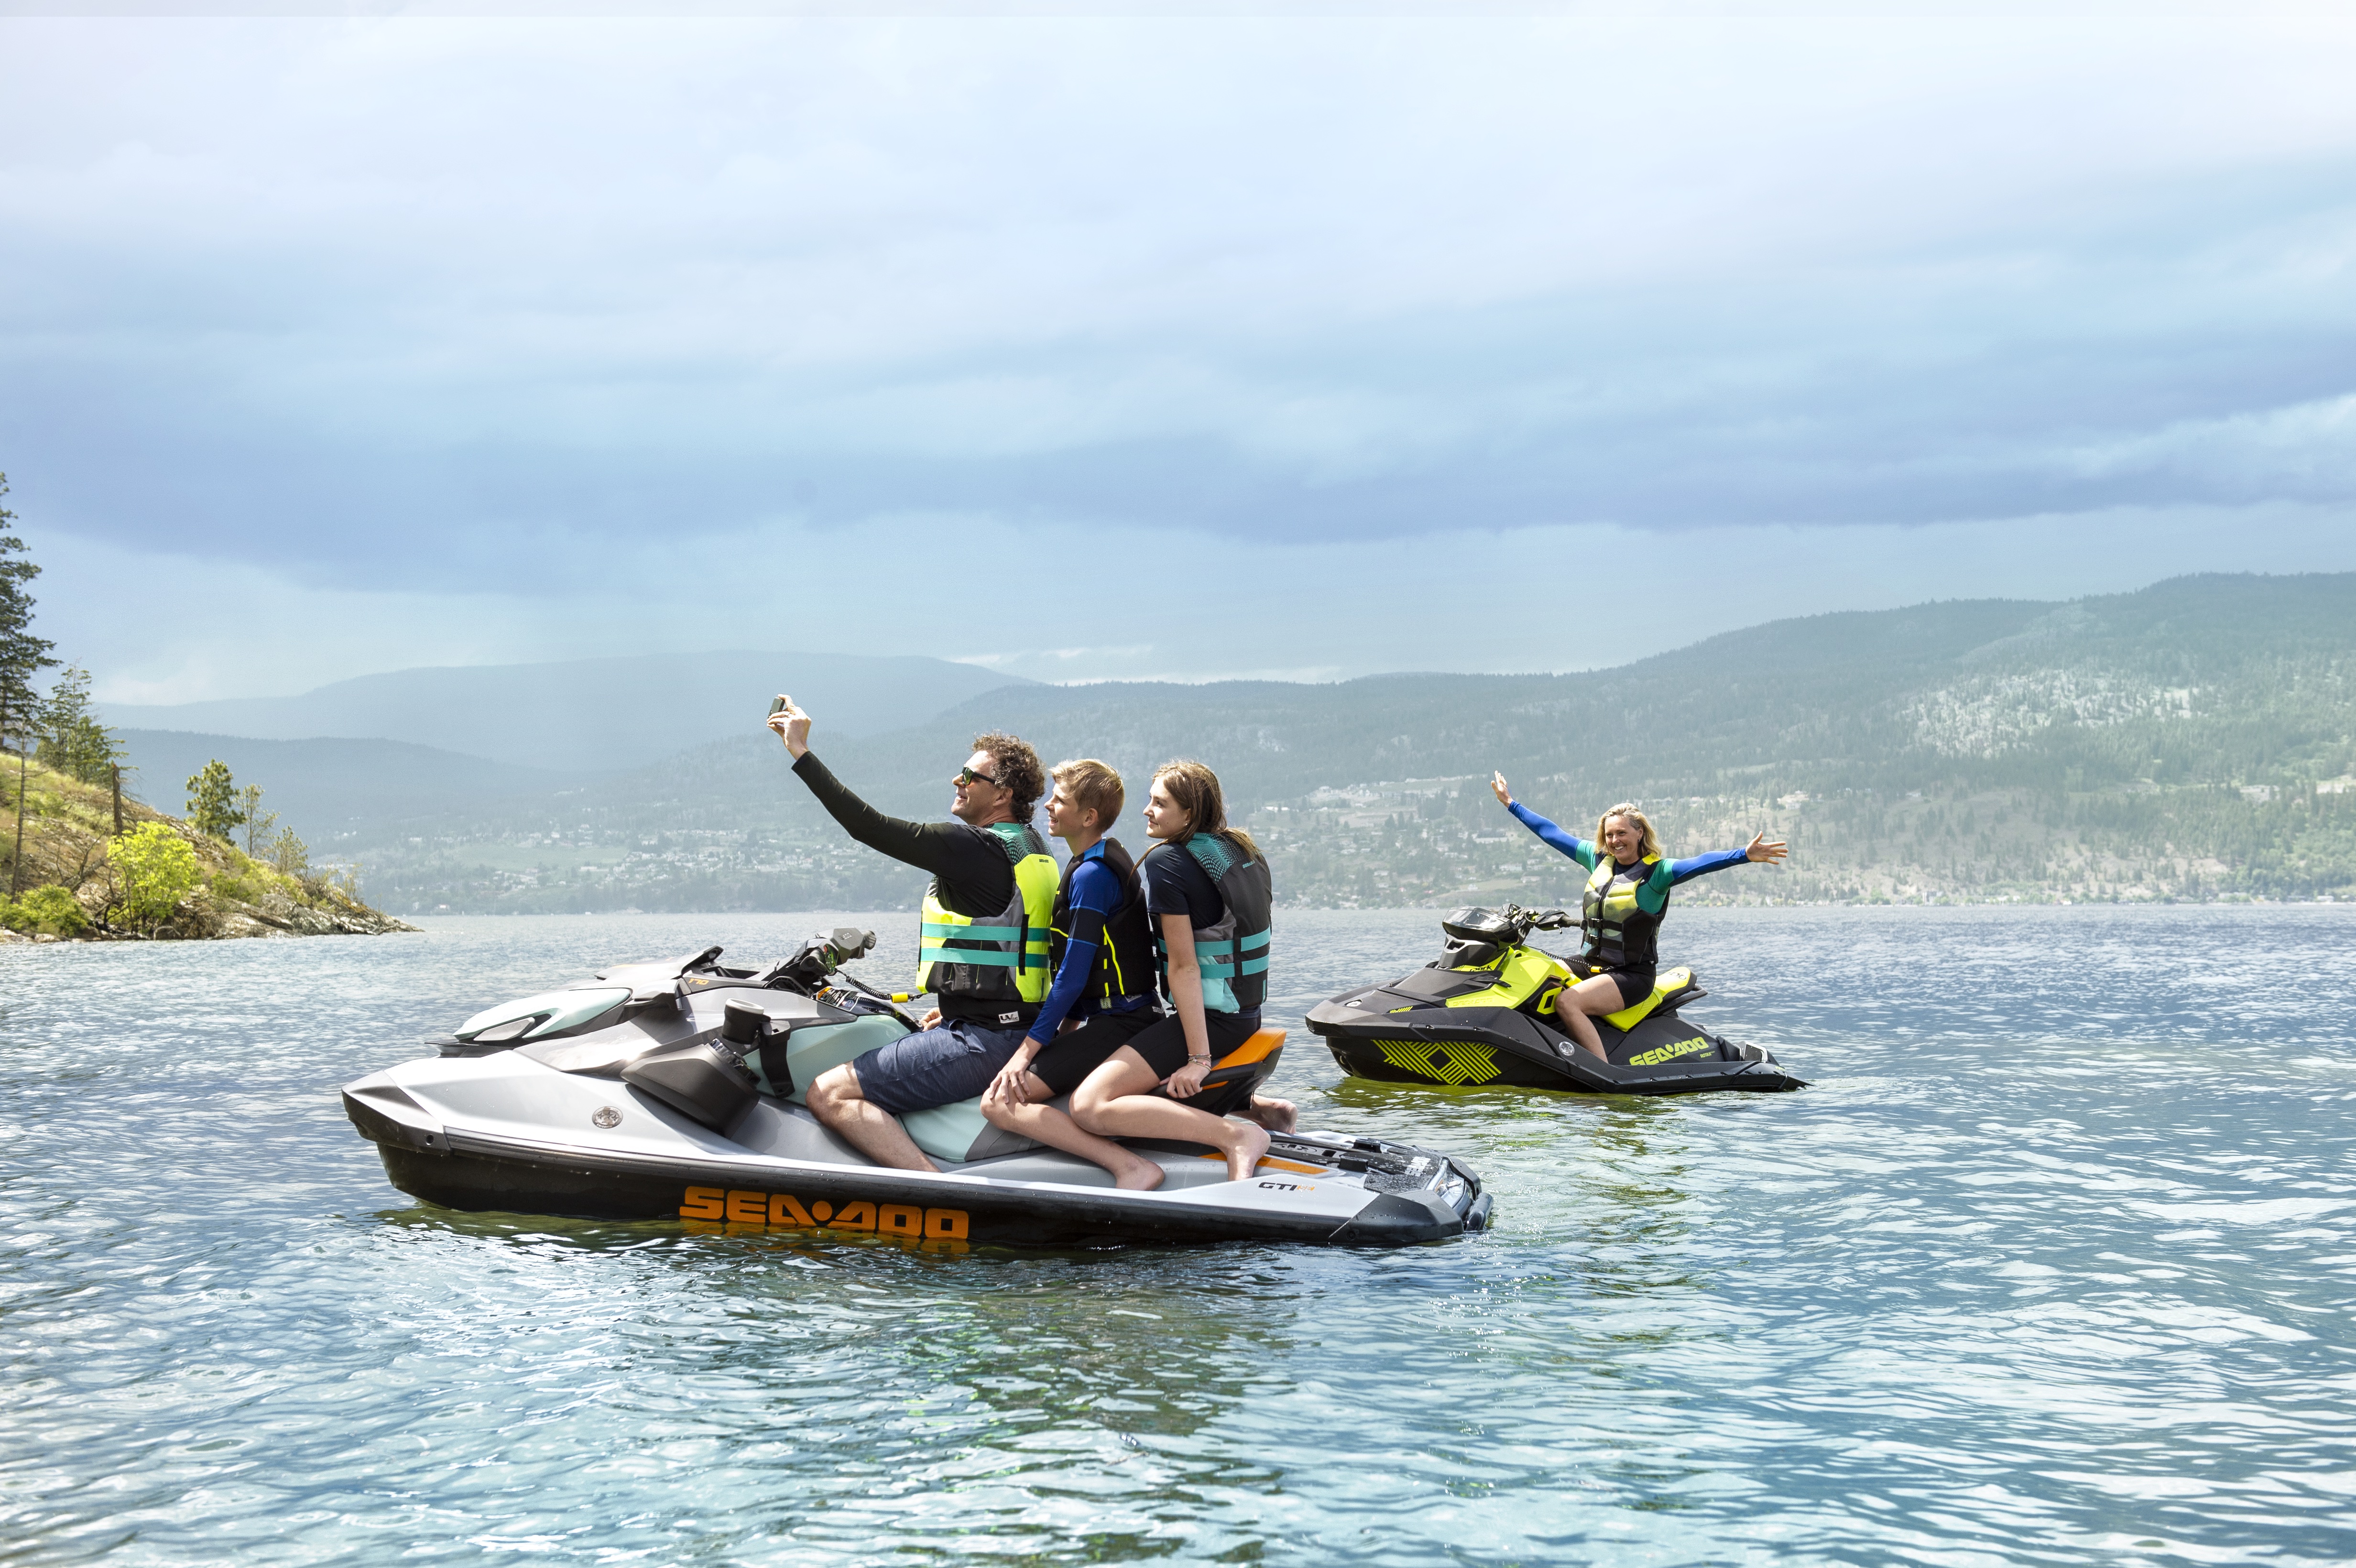 INTRODUCING THE MY23 SEA-DOO LINE-UP